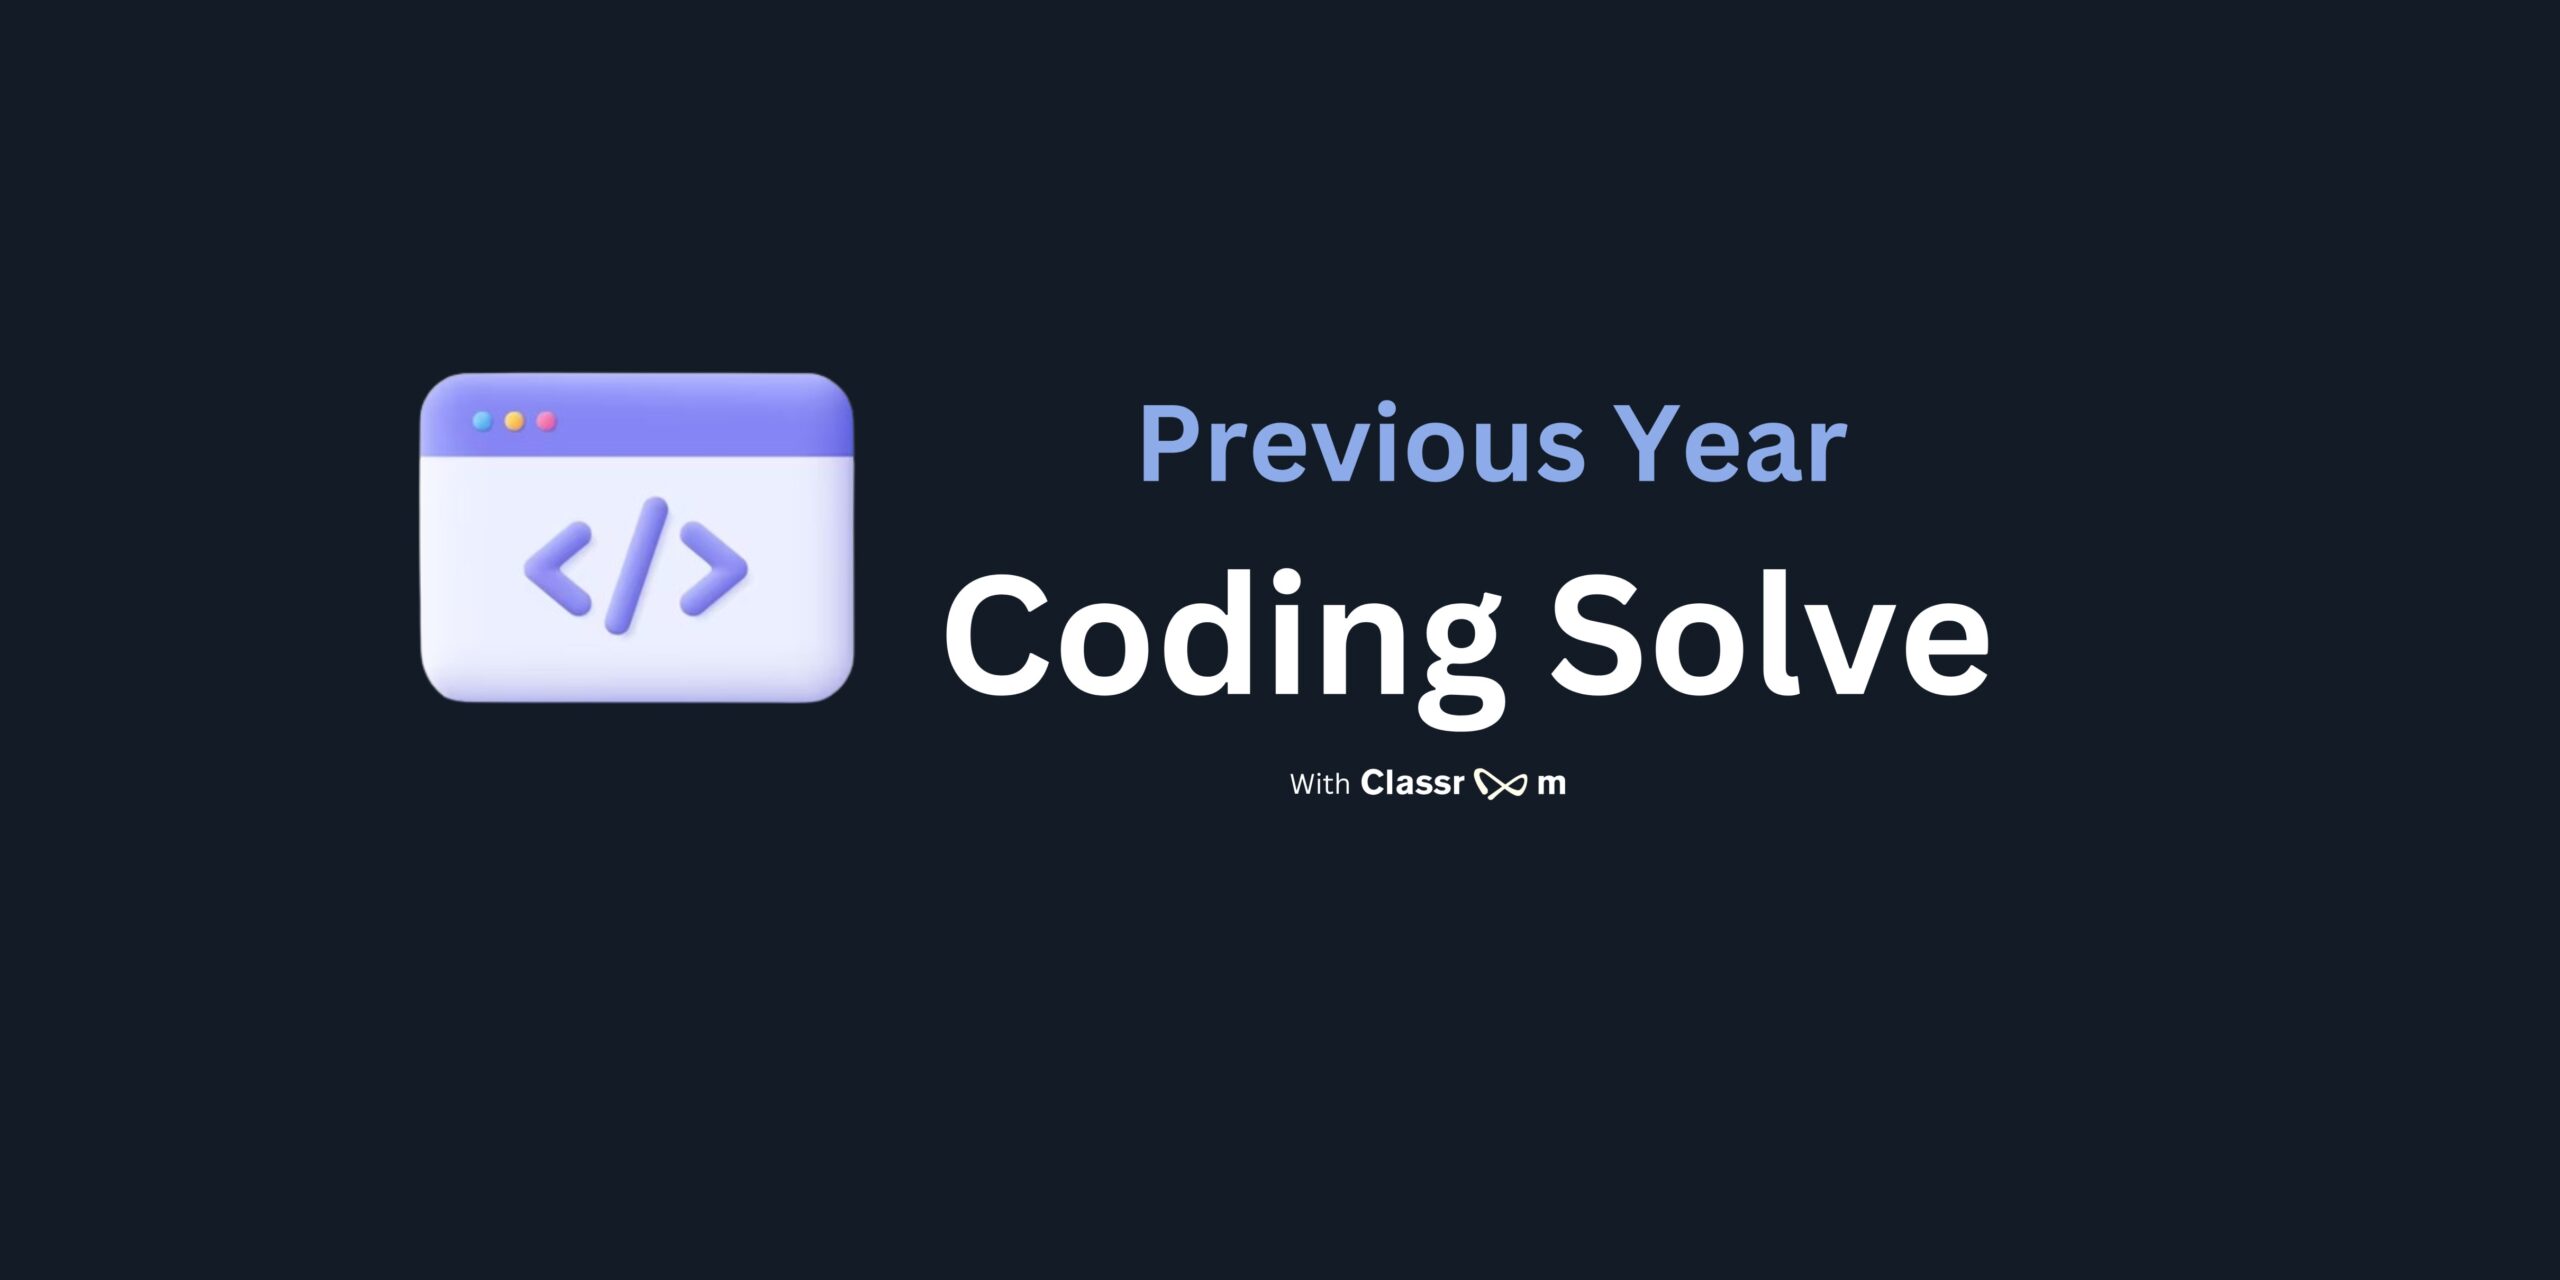 Previous Year Coding Solve